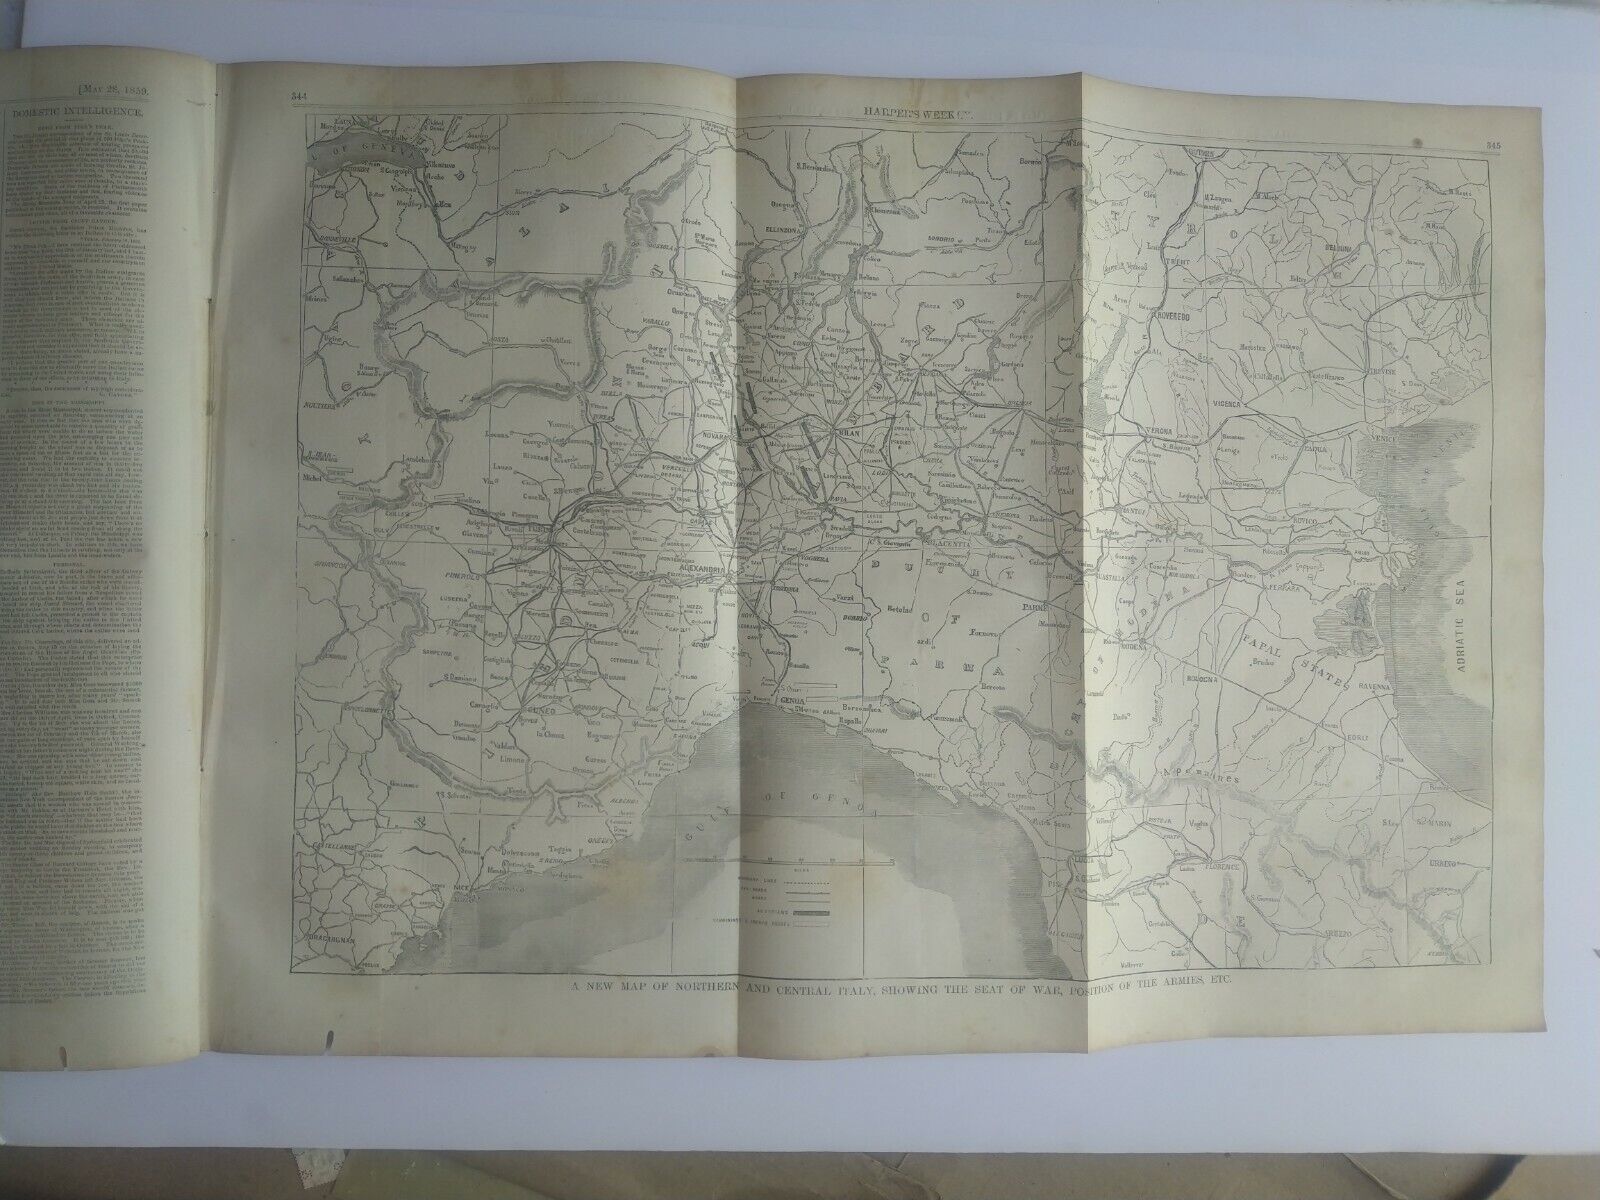 Harper's Weekly 5/28/1859 large map of the War in Italy / Abolitionists /Dickens